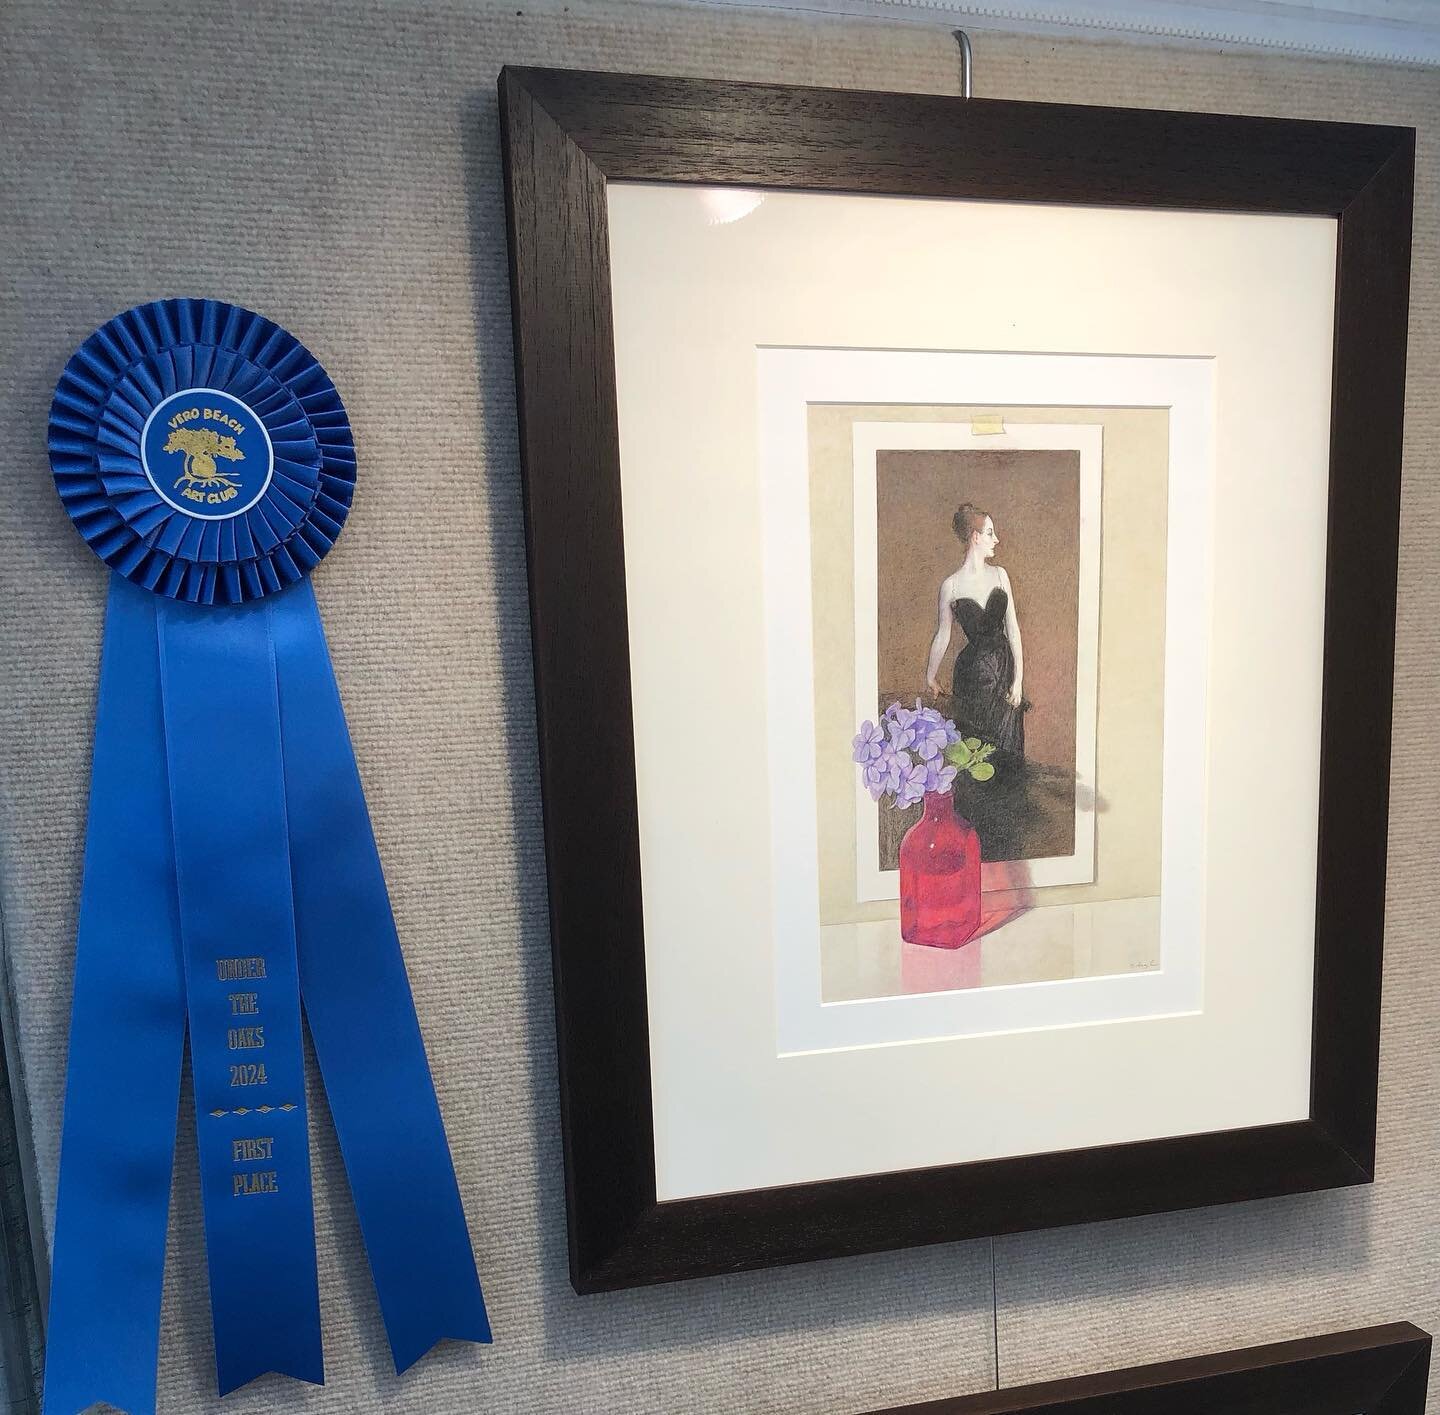 Thanks to this years judges at Under the Oaks Arts Festival in Vero Beach! 1st place in Graphics! Great first day, show continues today 9-5 and Sunday 10-4
Booth #211
#dennisangeldrawings #coloredpencil #undertheoaksartfestival